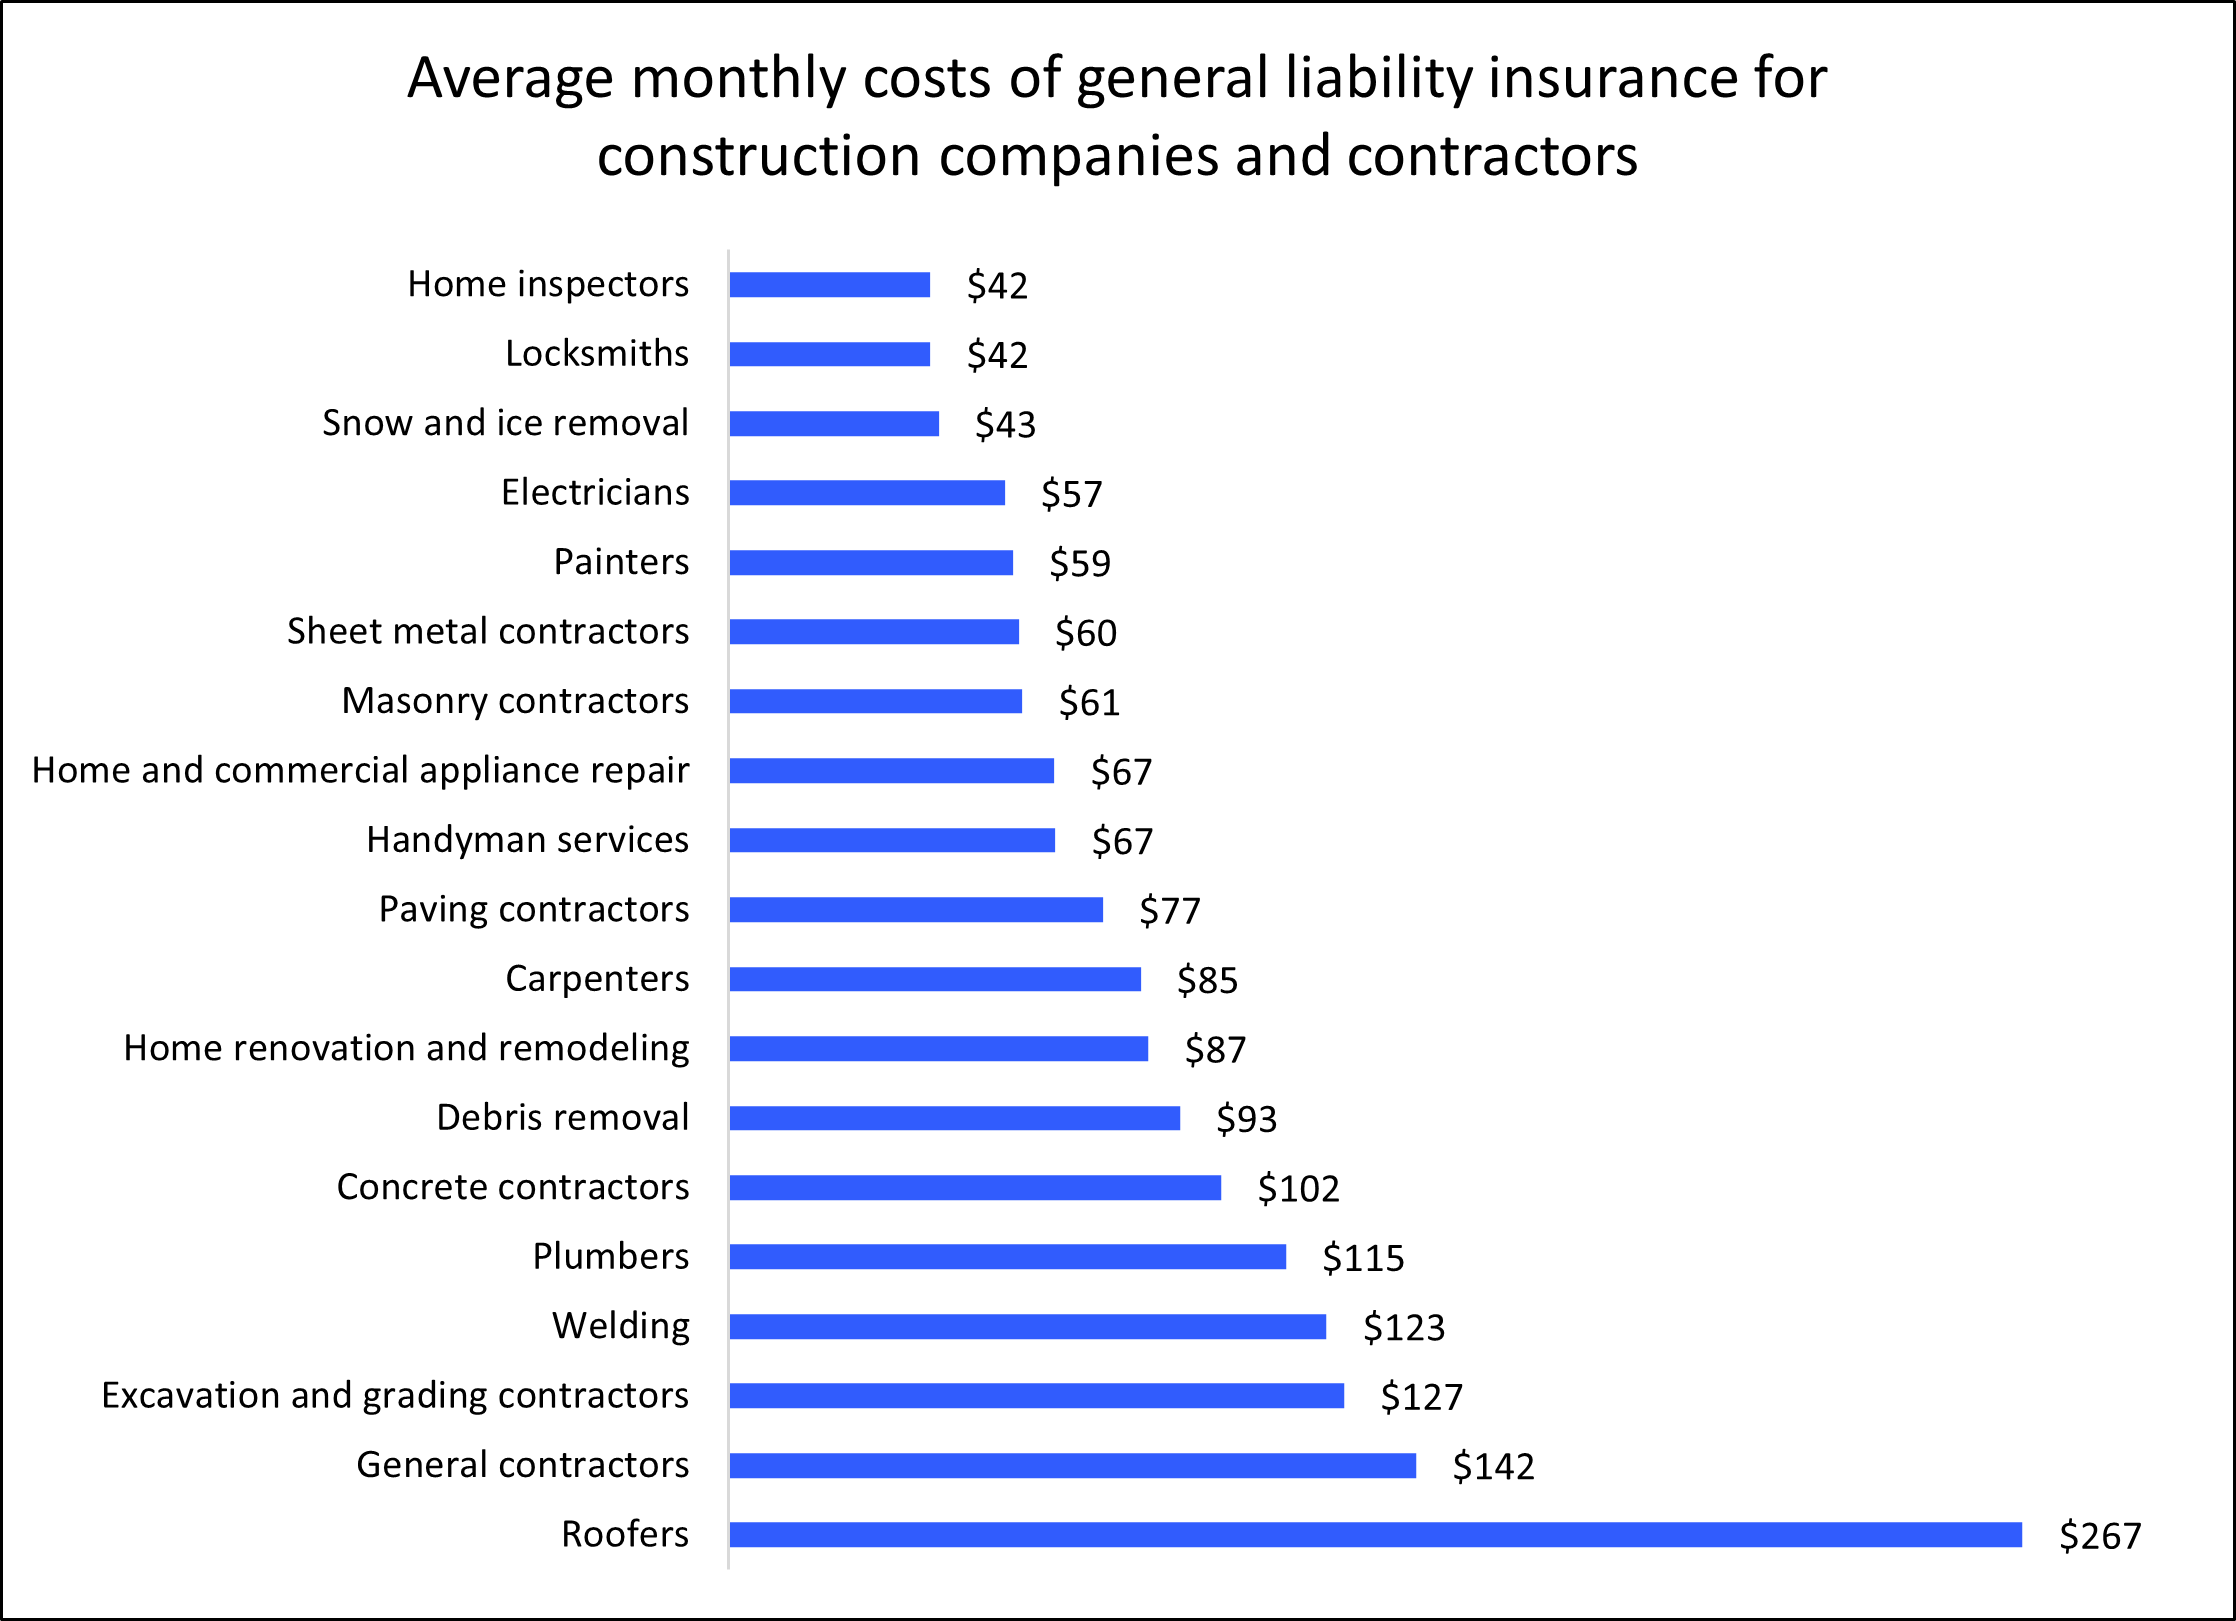 Average monthly costs of general liability insurance for construction companies and contractors.